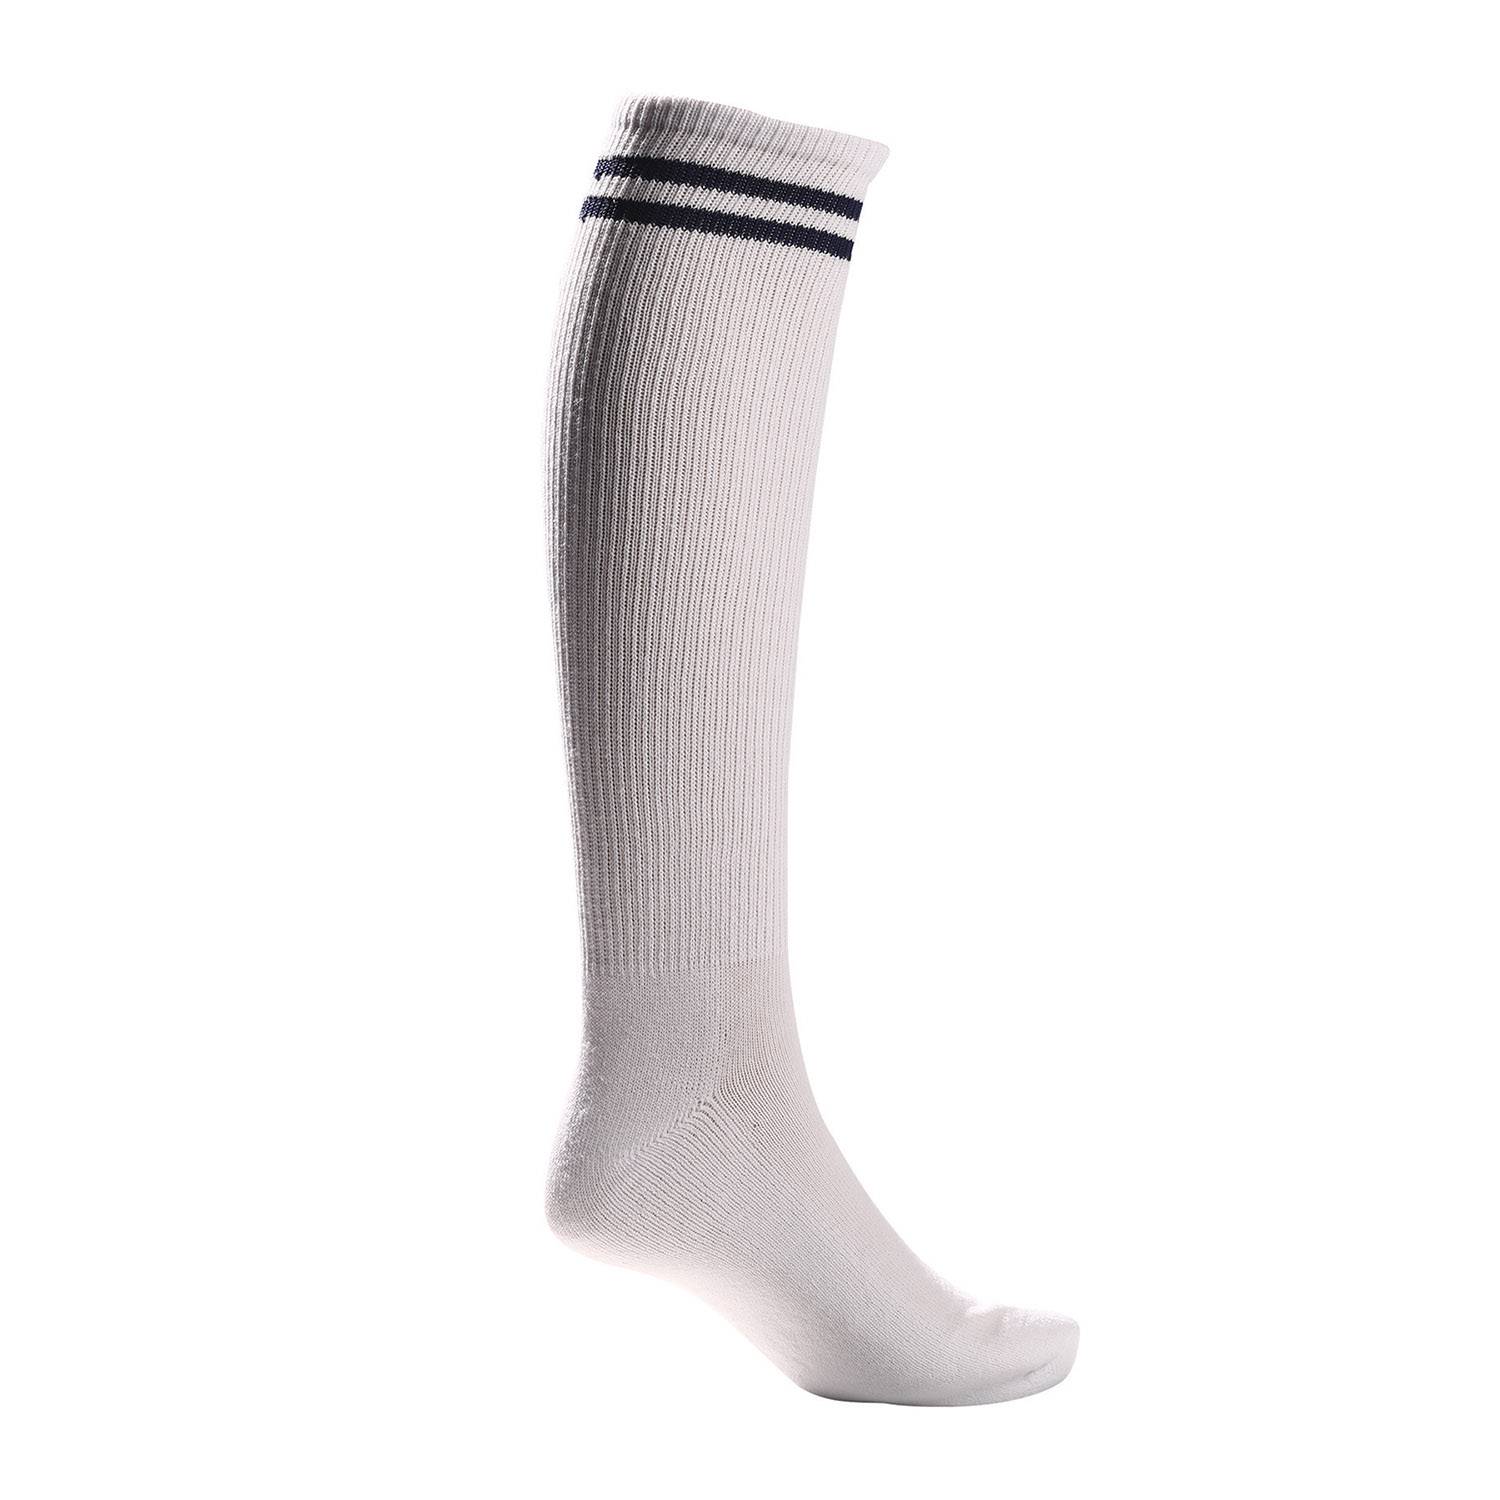 Pro Feet Postal Approved White Cotton Over the Calf Socks (S